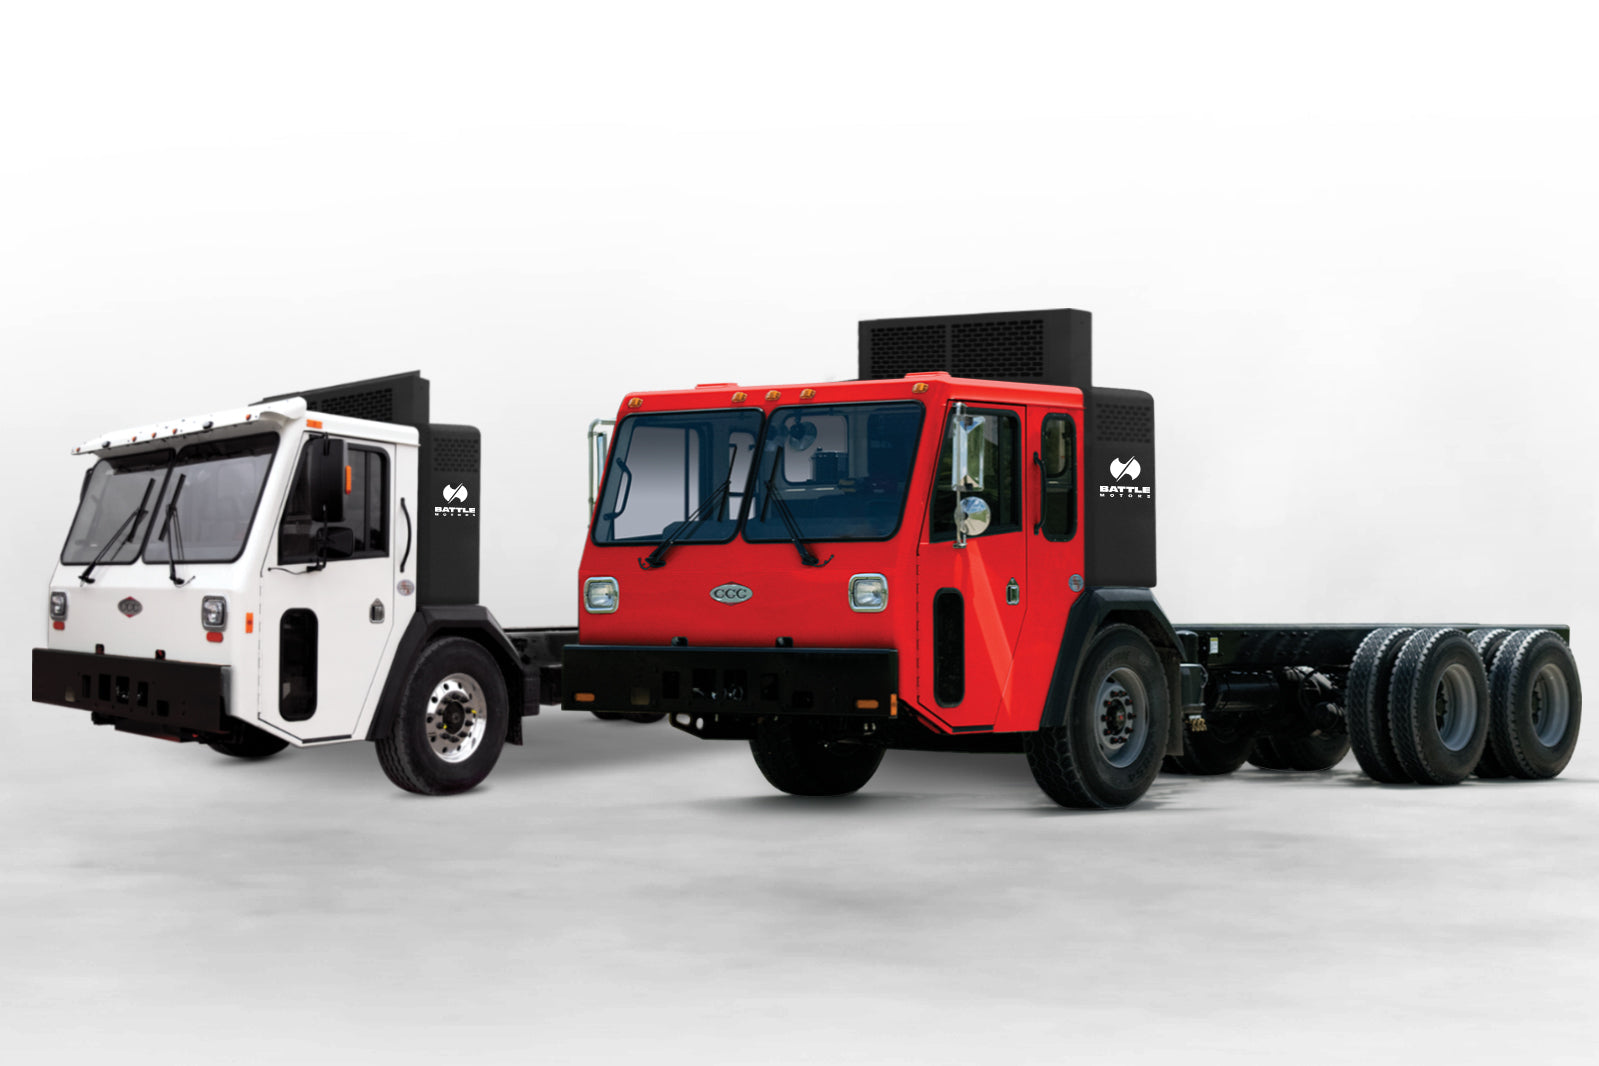 Battle Motors brings Electric Refuse vehicles to New York City in partnership with Liberty Ashes, Inc.